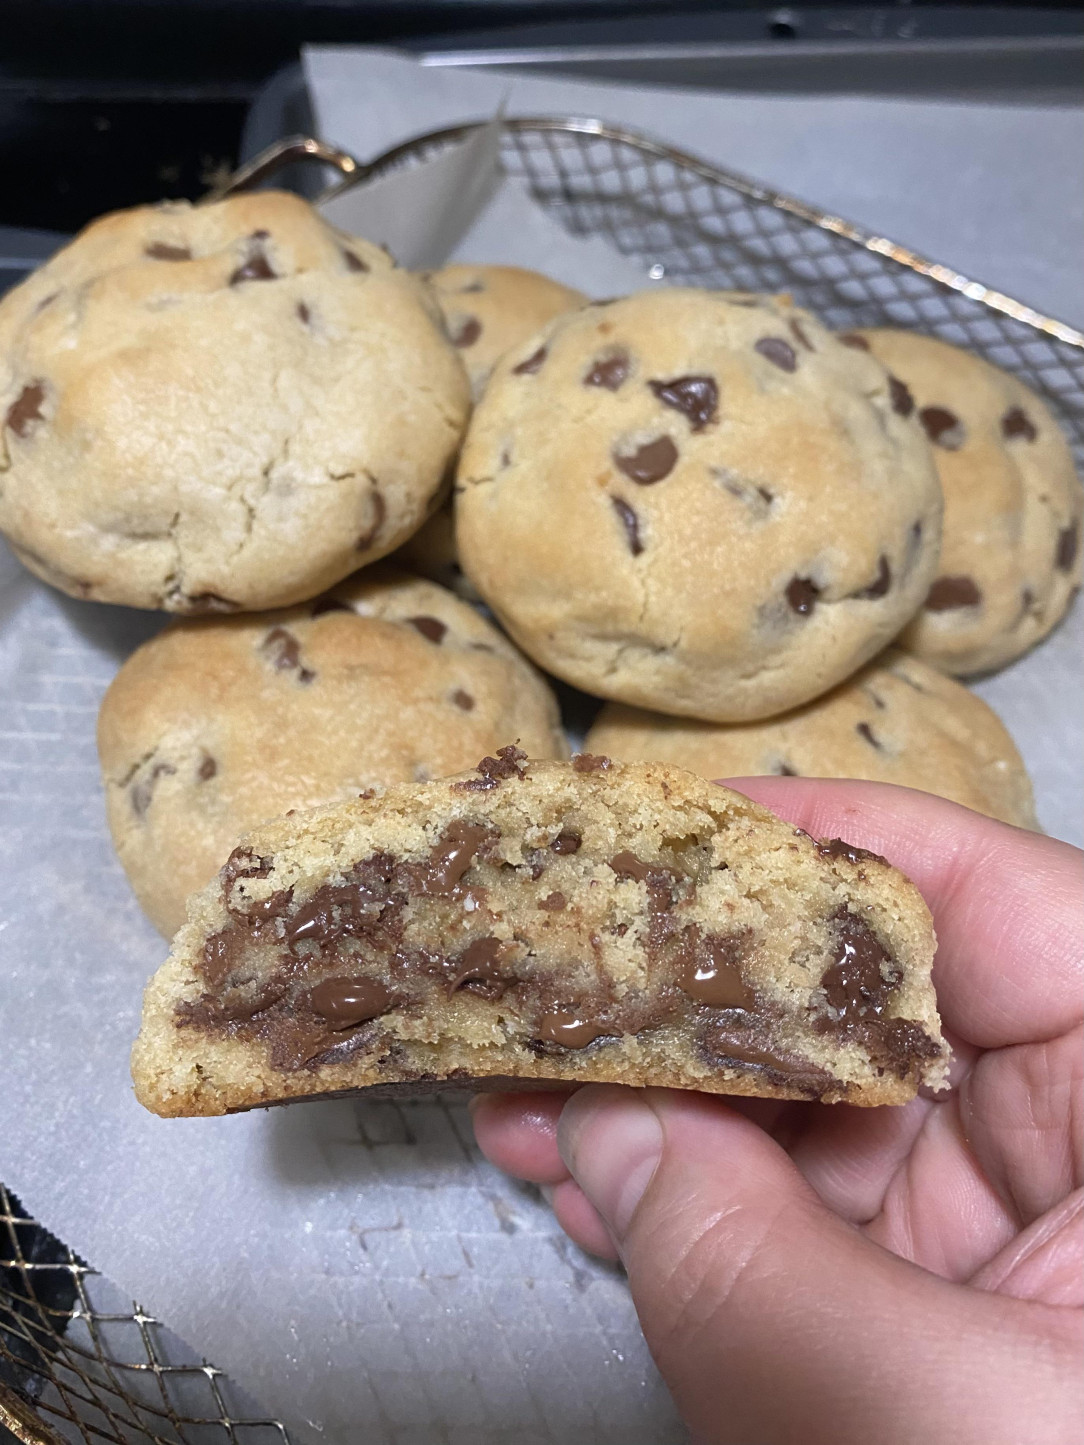 These NYC style chocolate chip cookies I baked belong here